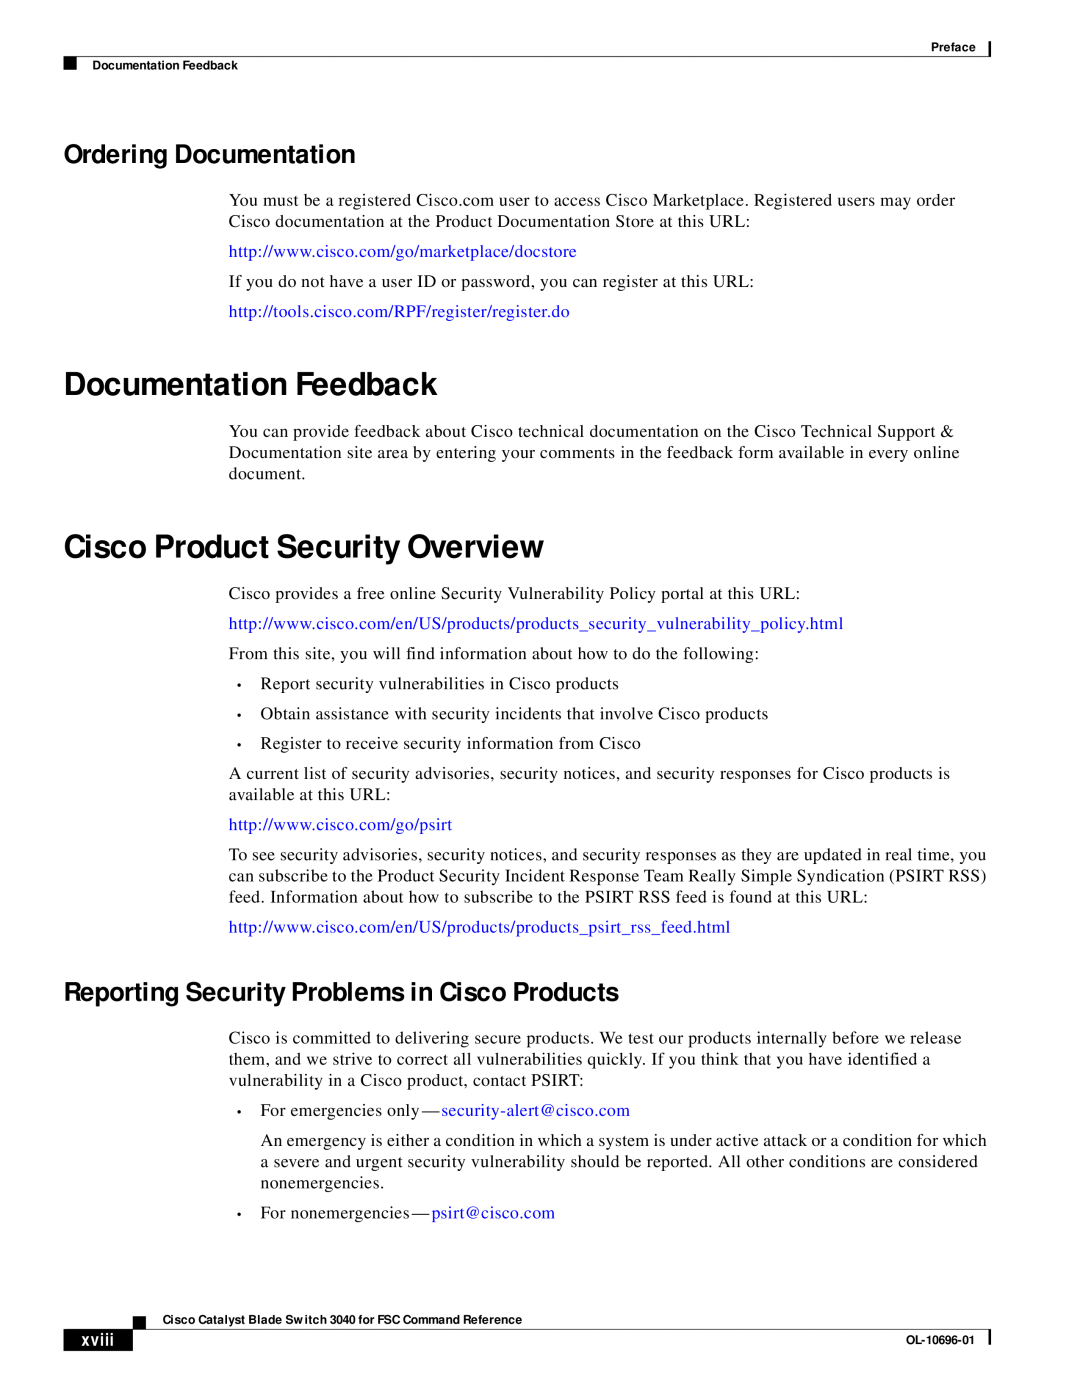 Cisco Systems 3040 manual Documentation Feedback, Cisco Product Security Overview, Ordering Documentation, xviii 